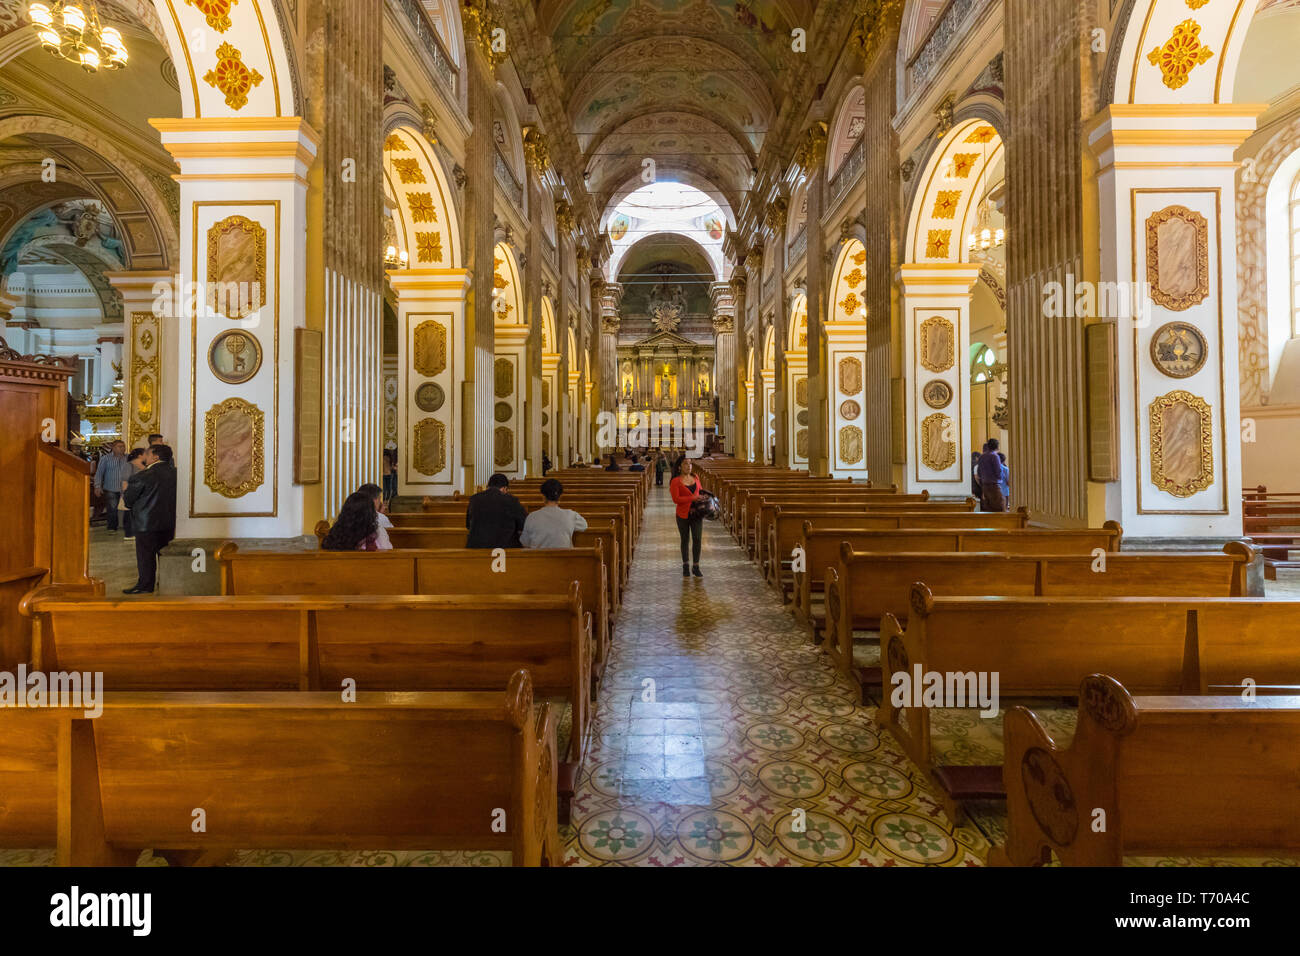 cathedral temple Pasto Colombia internal view central nave Stock Photo